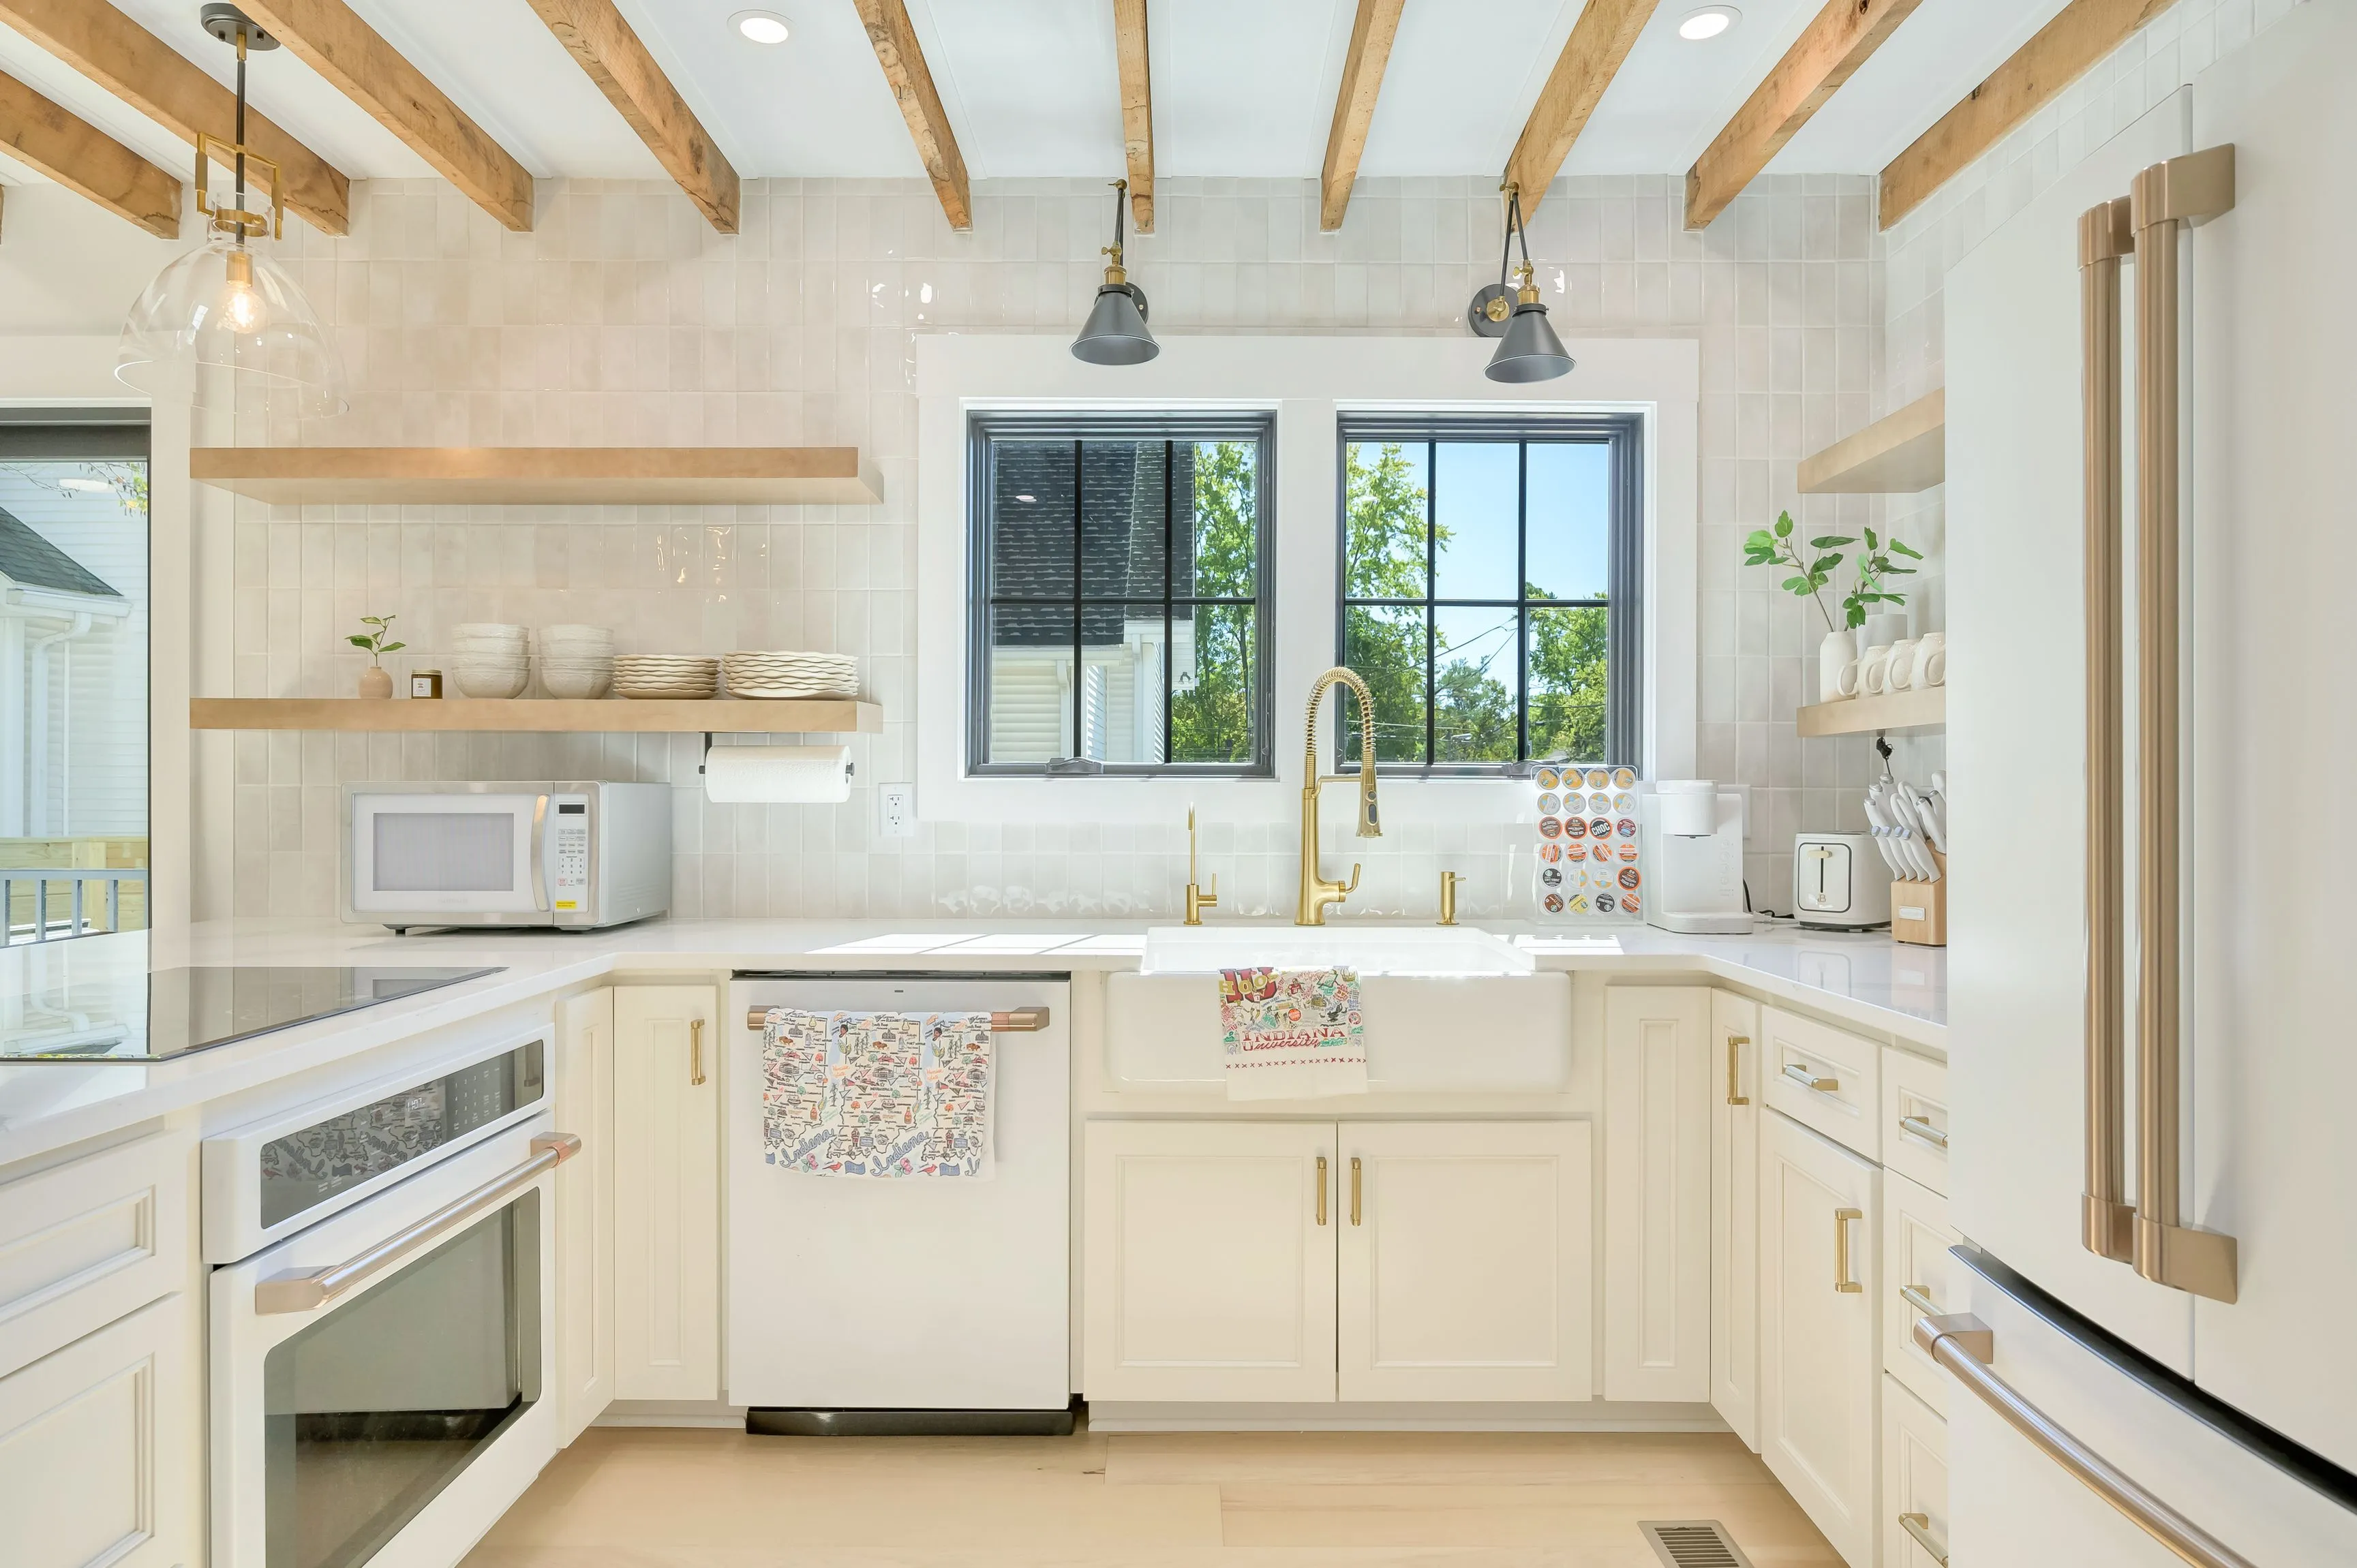 Bright and airy kitchen interior with white cabinetry, a farmhouse sink, floating wooden shelves, and exposed ceiling beams.